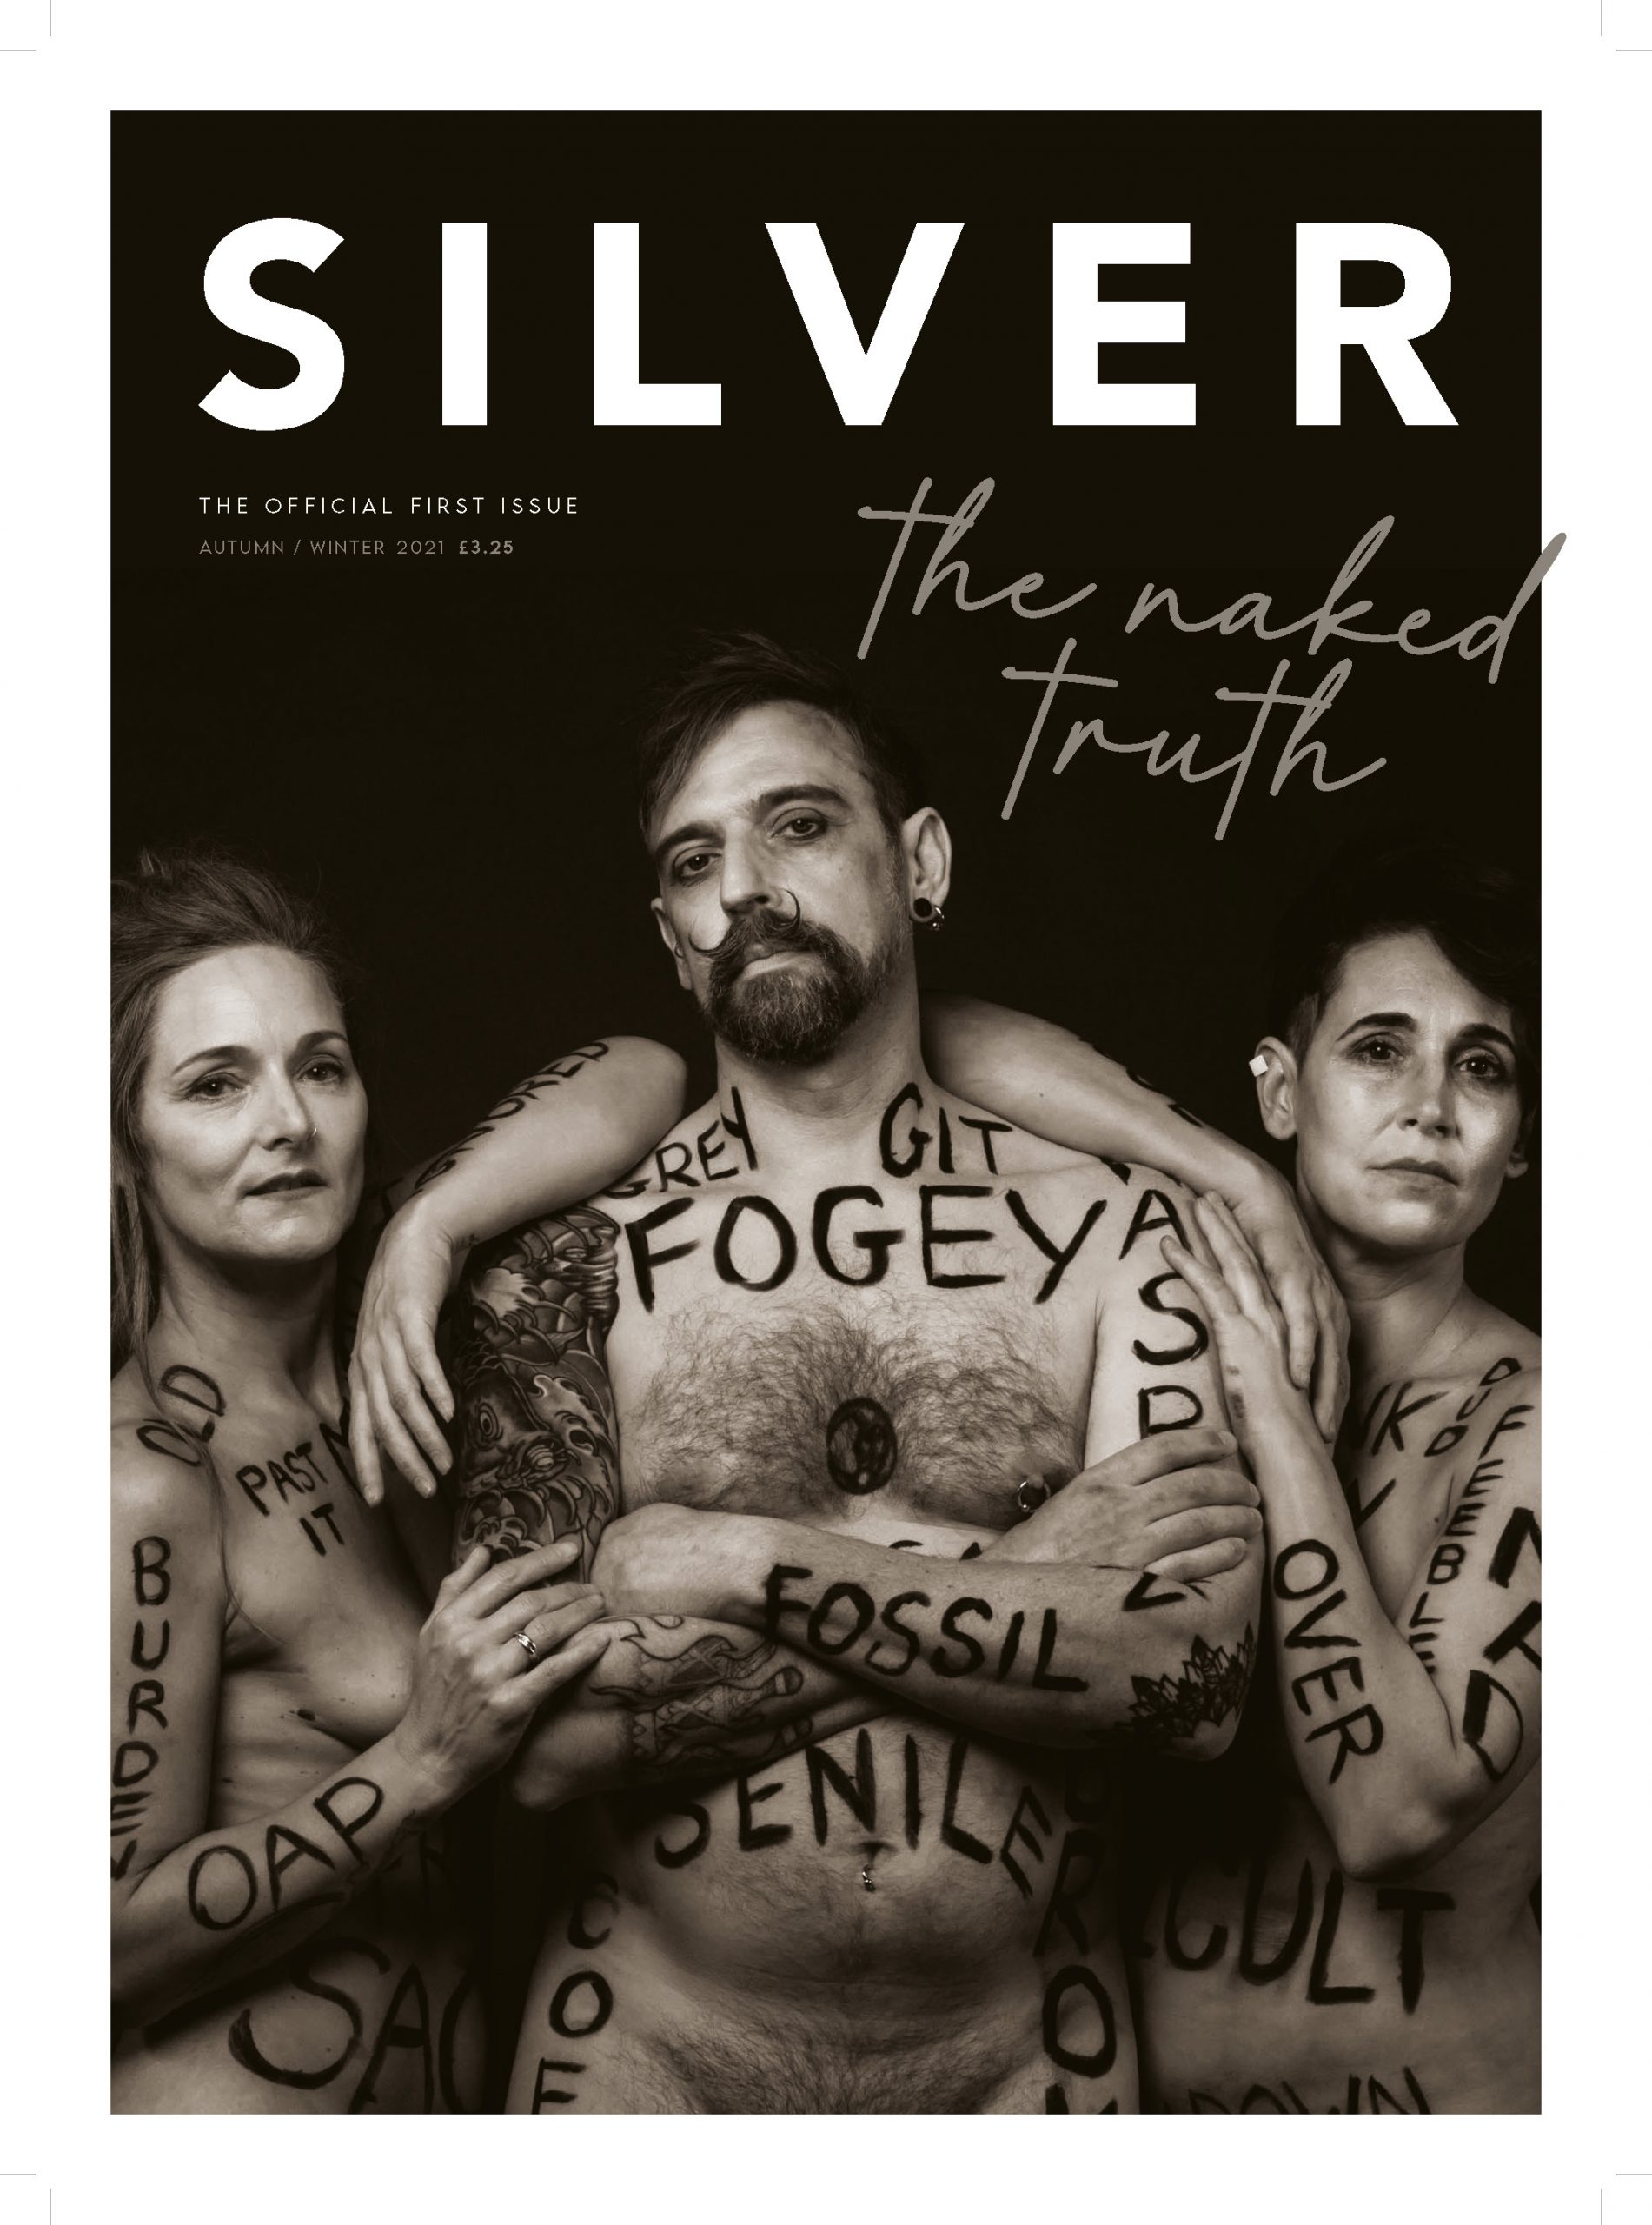 Silver Magazine Issue 1 - subscribe now www.silvermagazine.co.uk